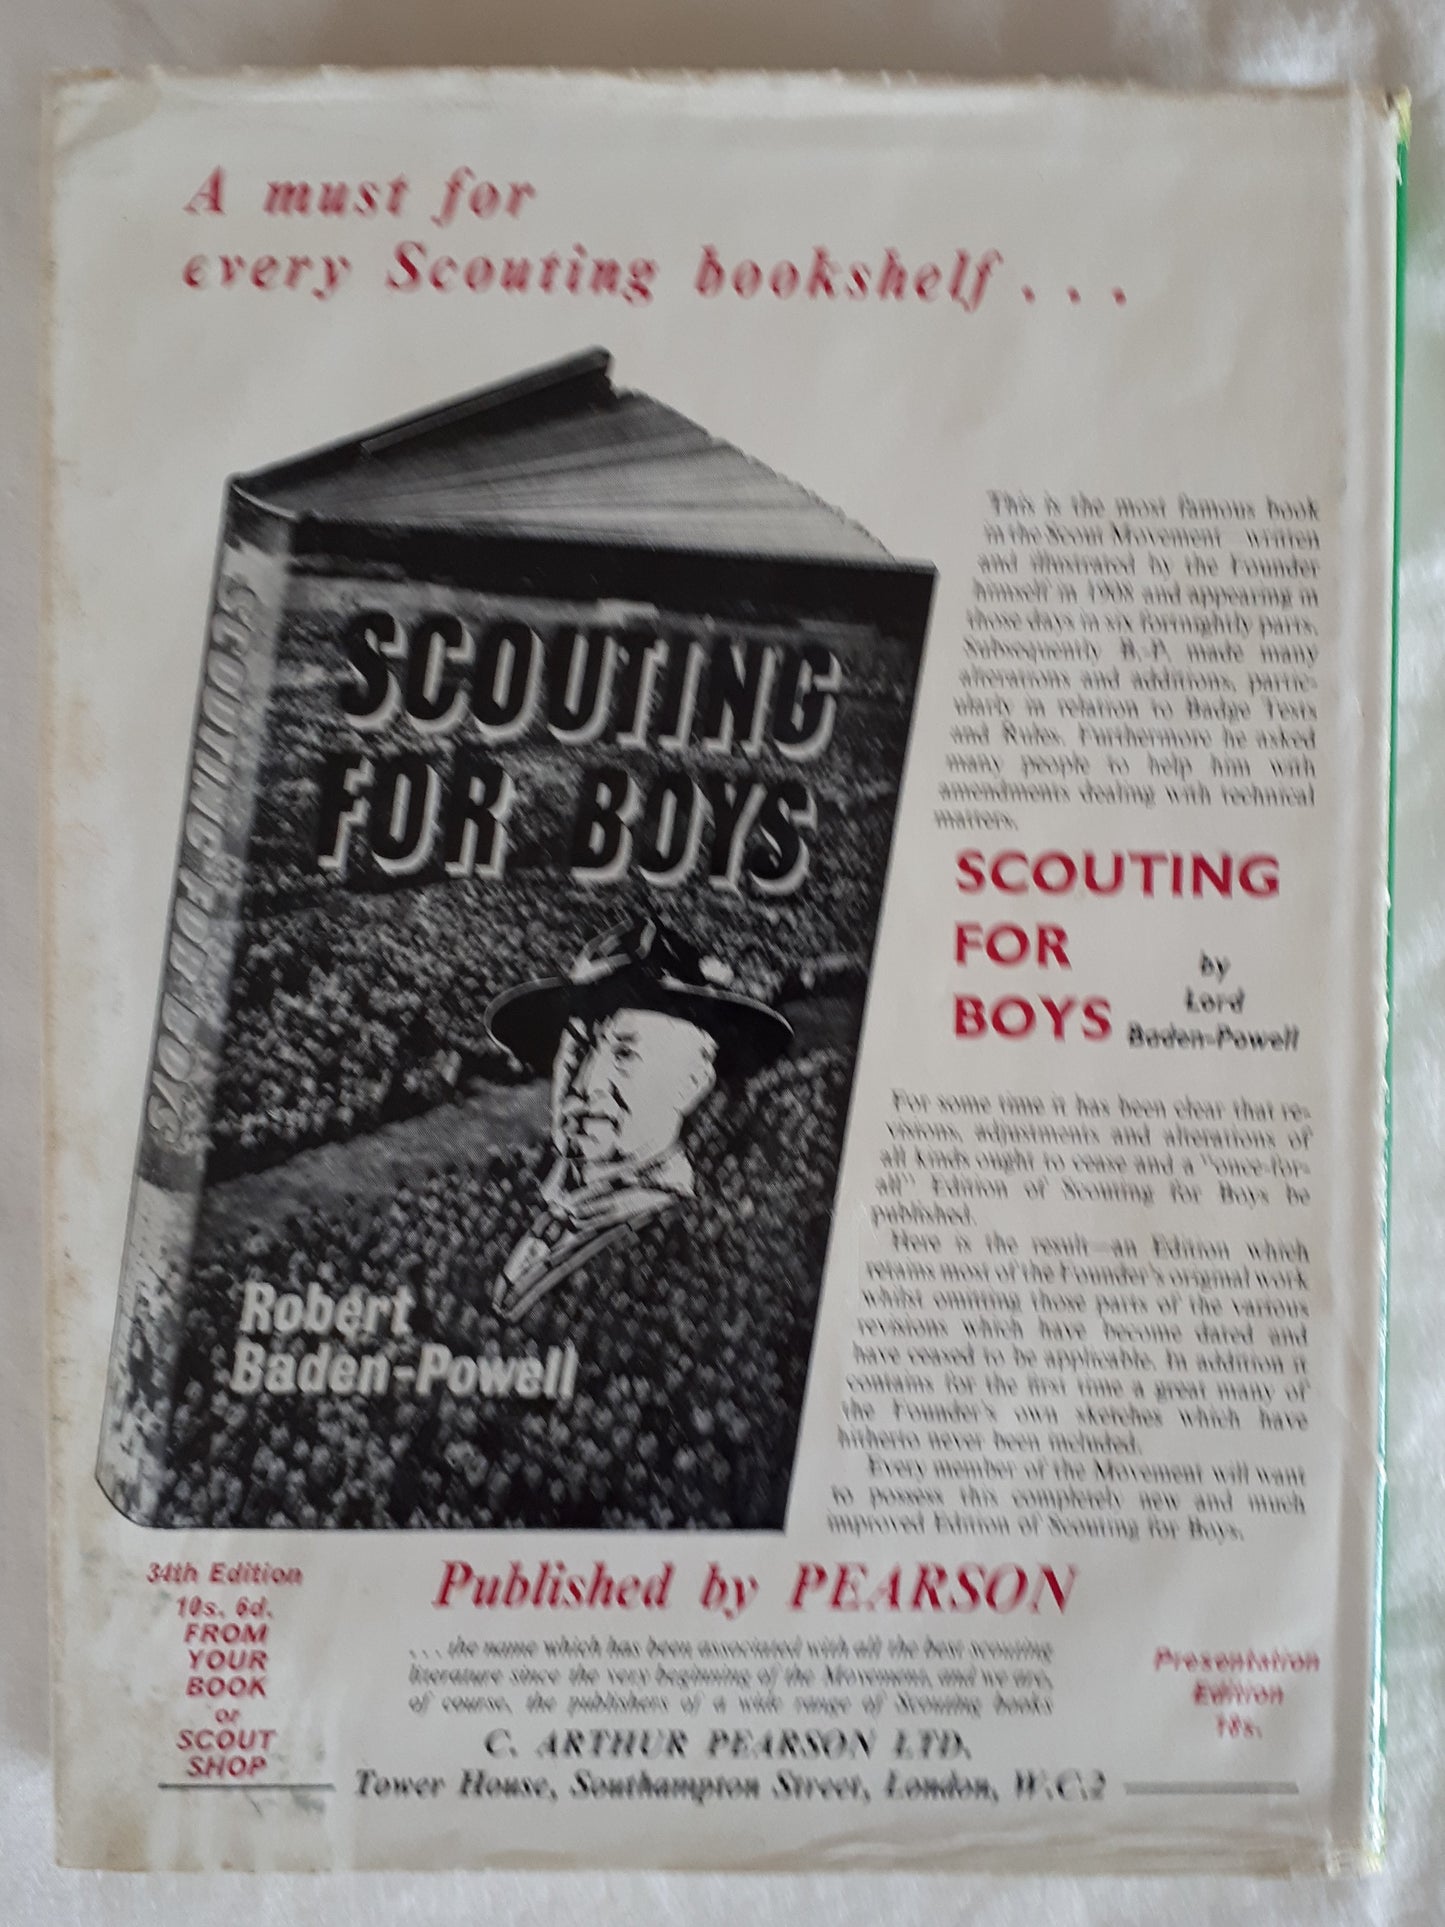 The Scout Annual 1968 edited by Rex Hazlewood